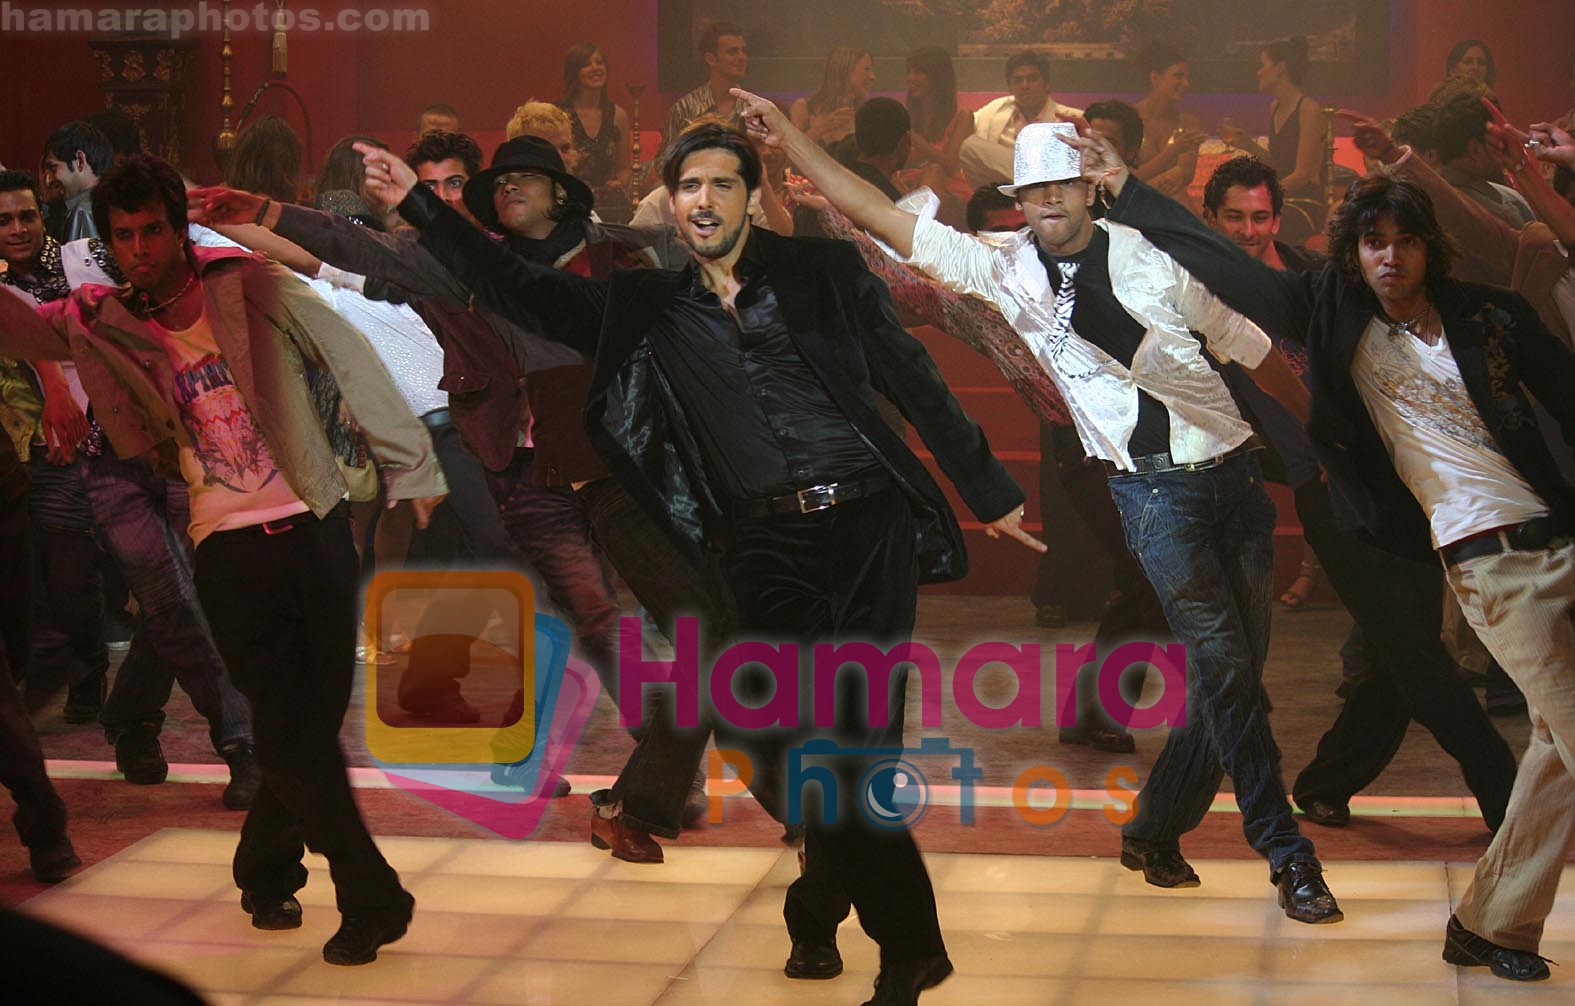 Zayed Khan On Location of Mission Istanbul on May 19th 2008